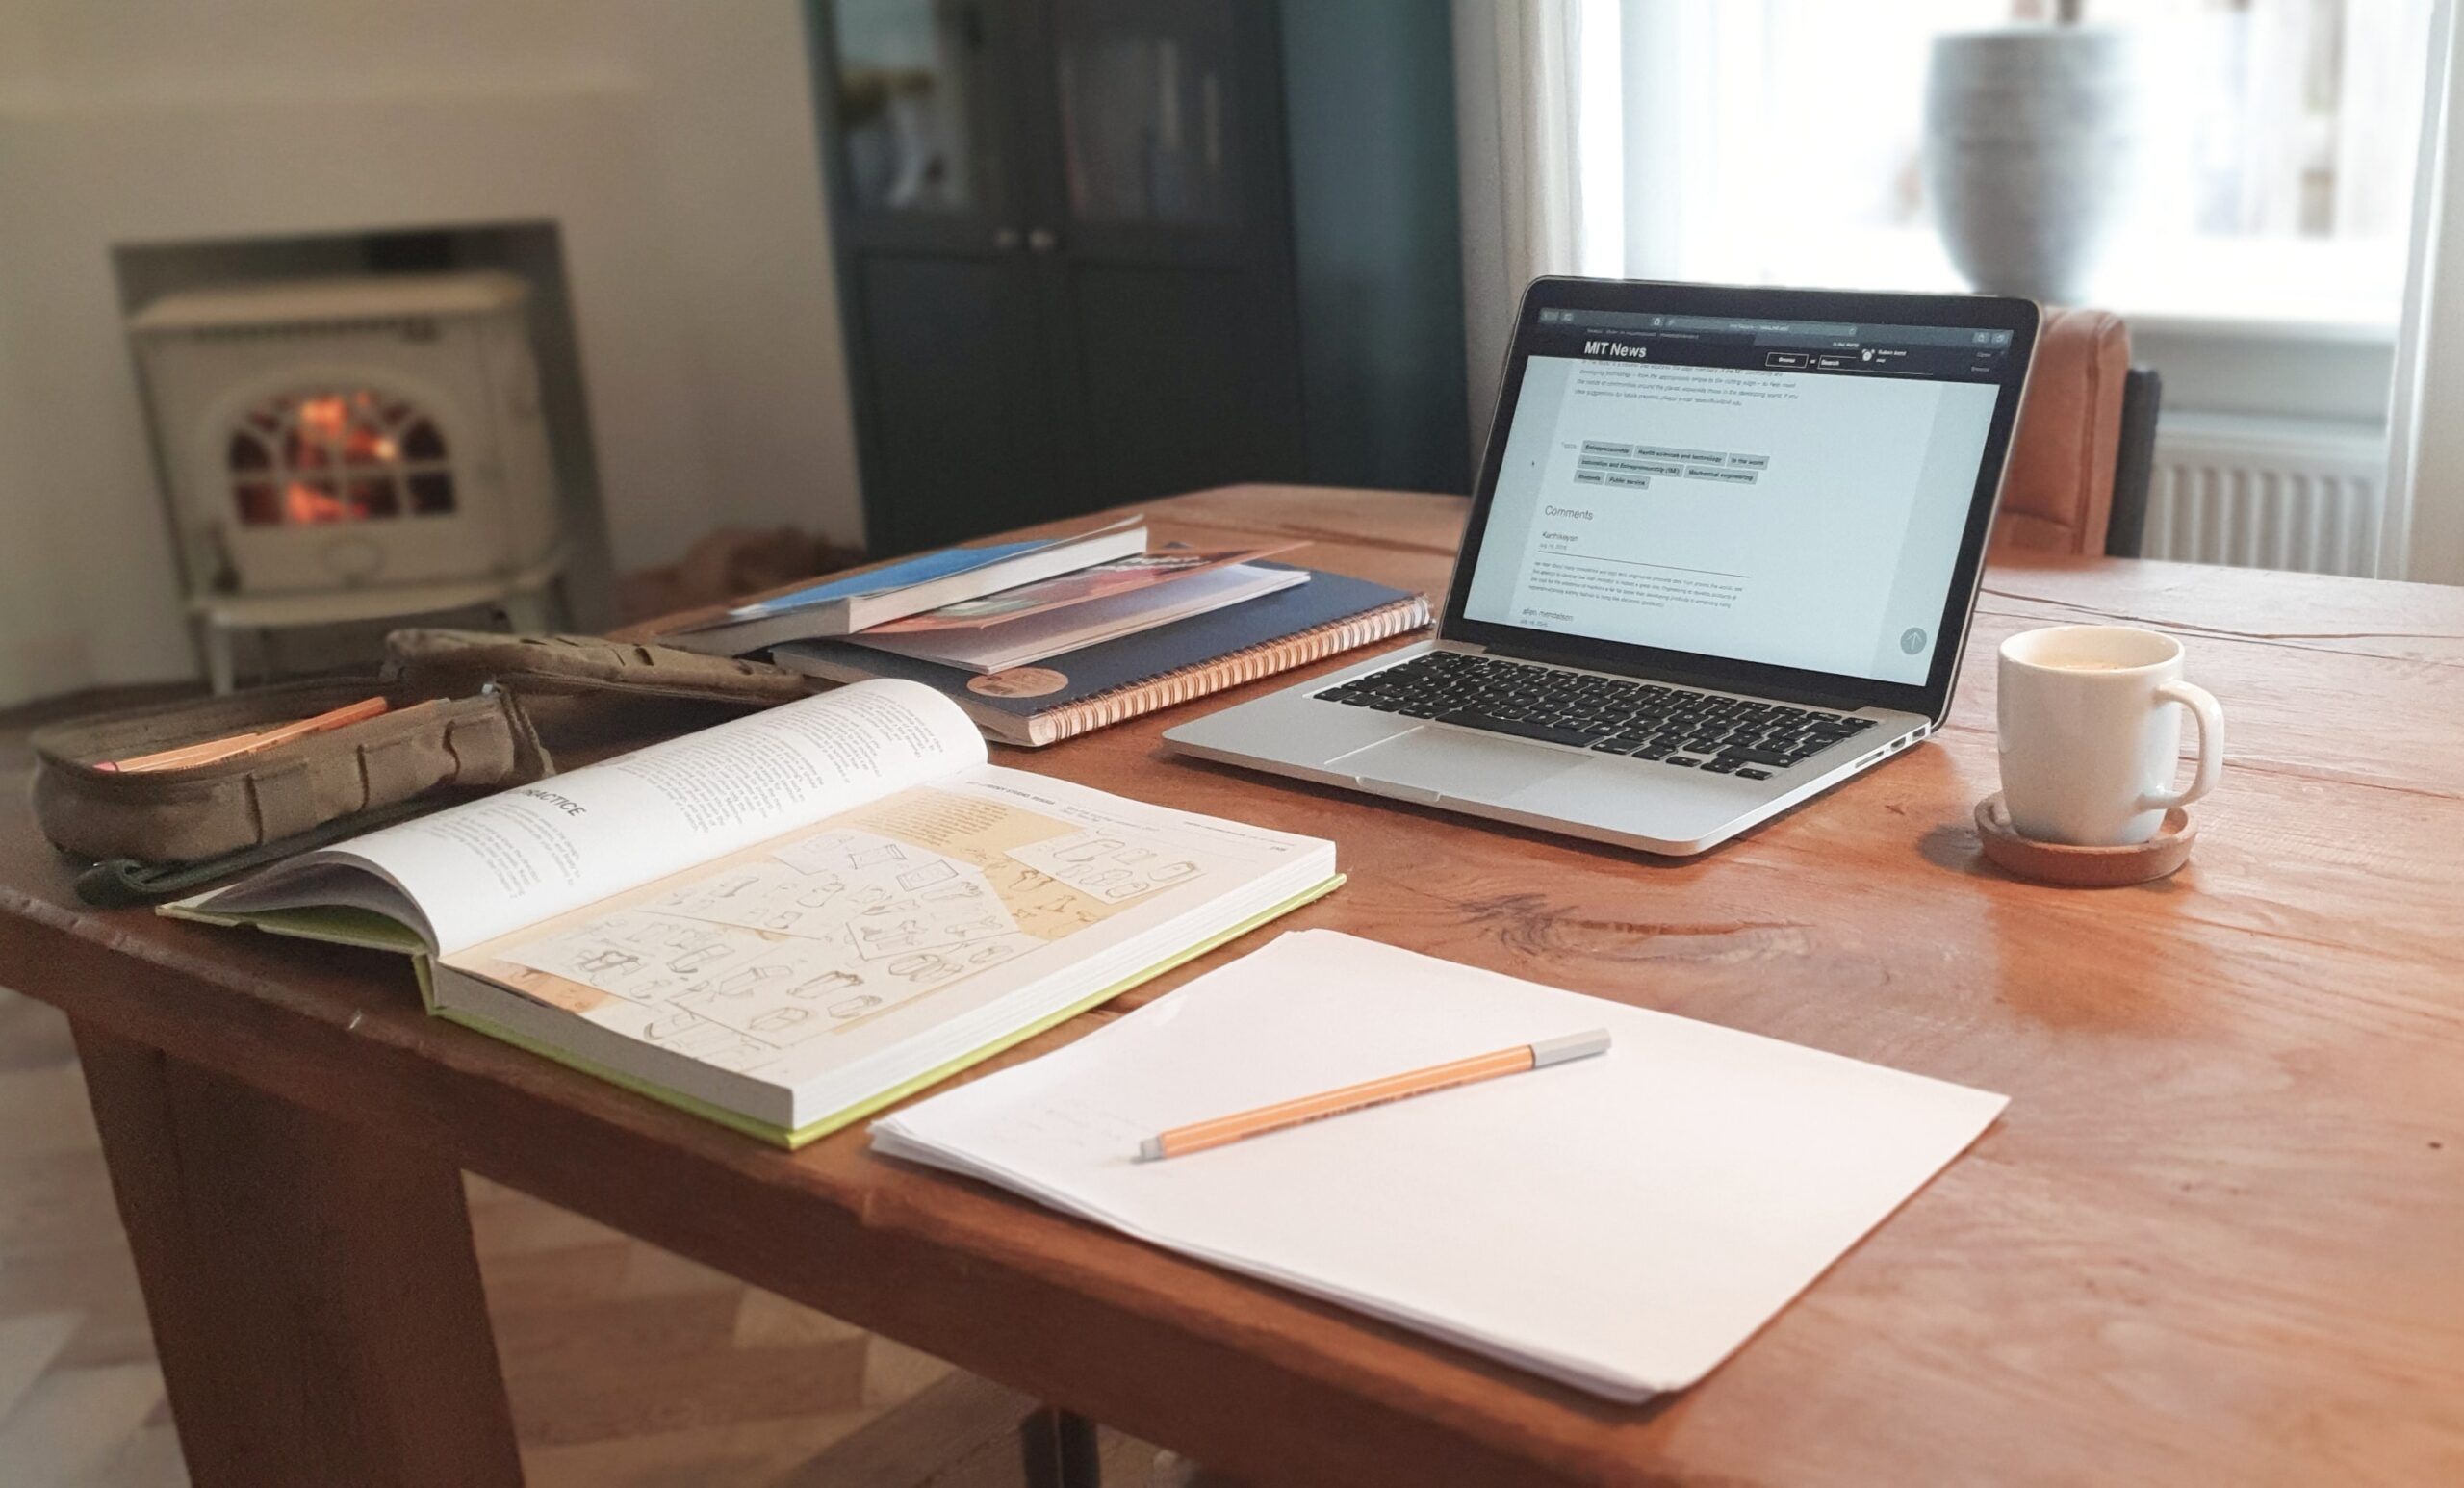 stock photo of a table spread with study materials, coffee, and a laptop